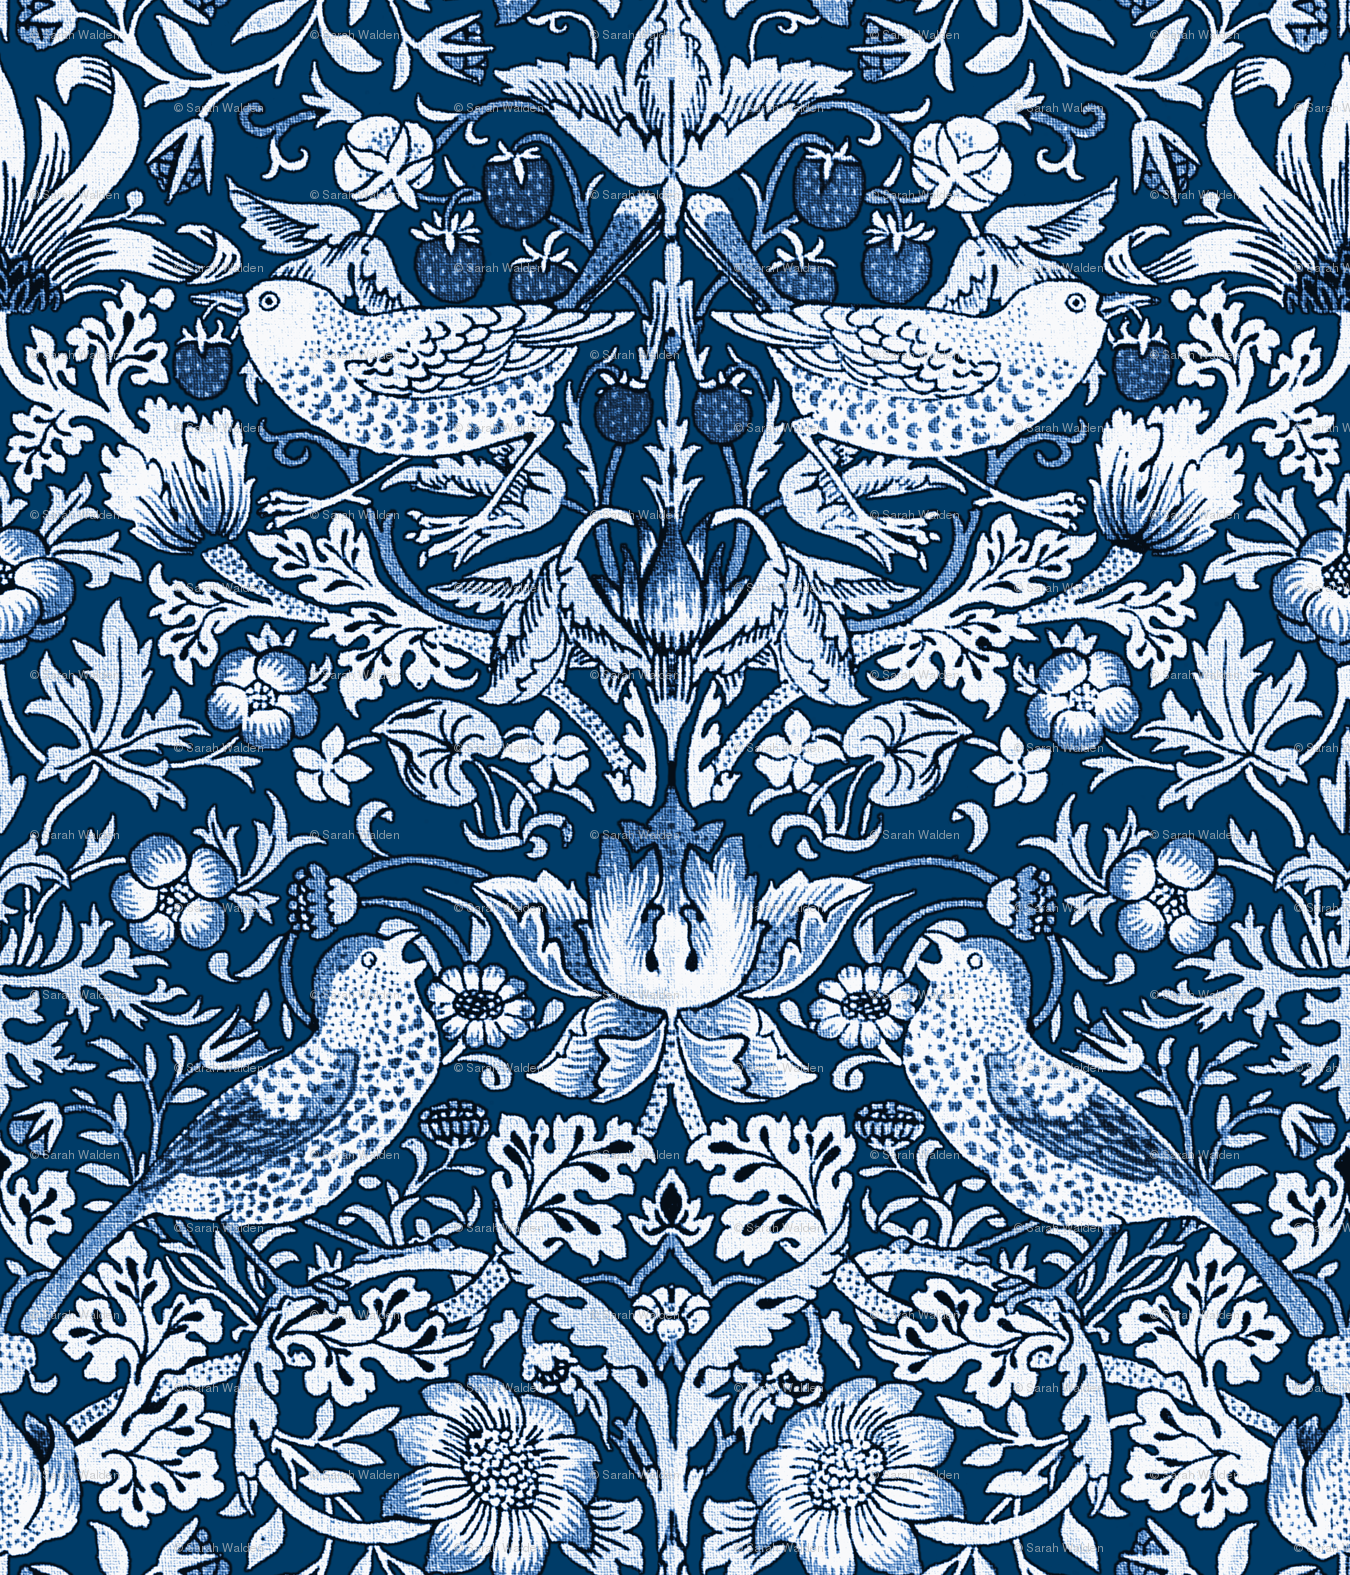 William Morris Strawberry Thief Fabric - Arts And Crafts William Morris Tiles , HD Wallpaper & Backgrounds